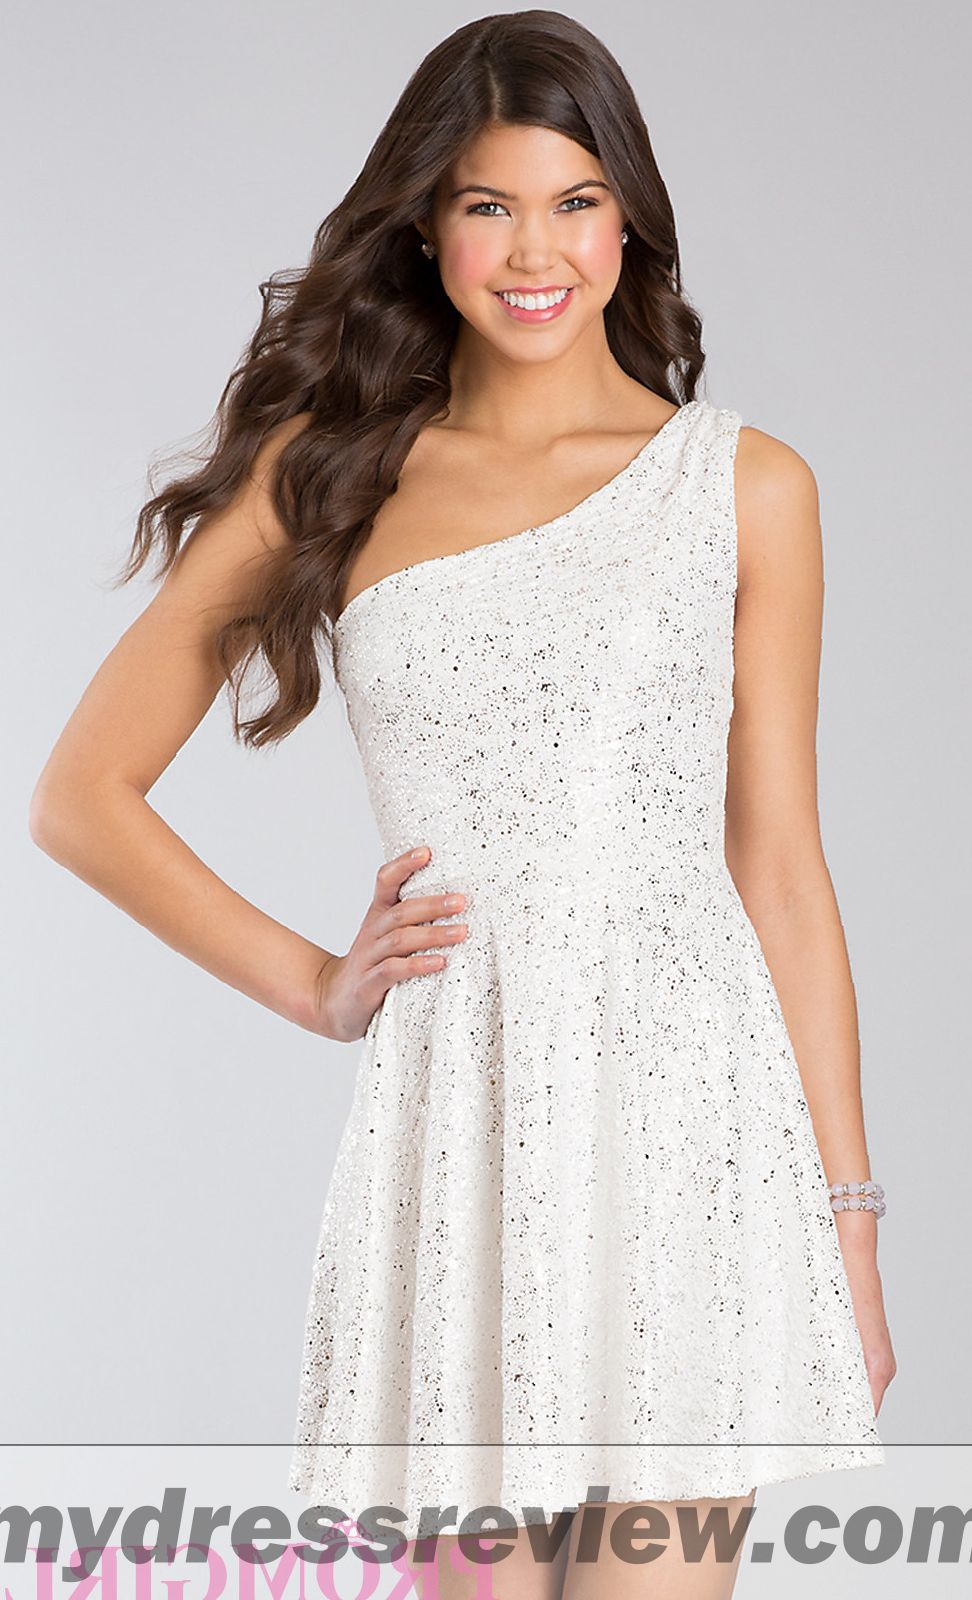 White Dresses For Girls Graduation - Different Occasions - MyDressReview